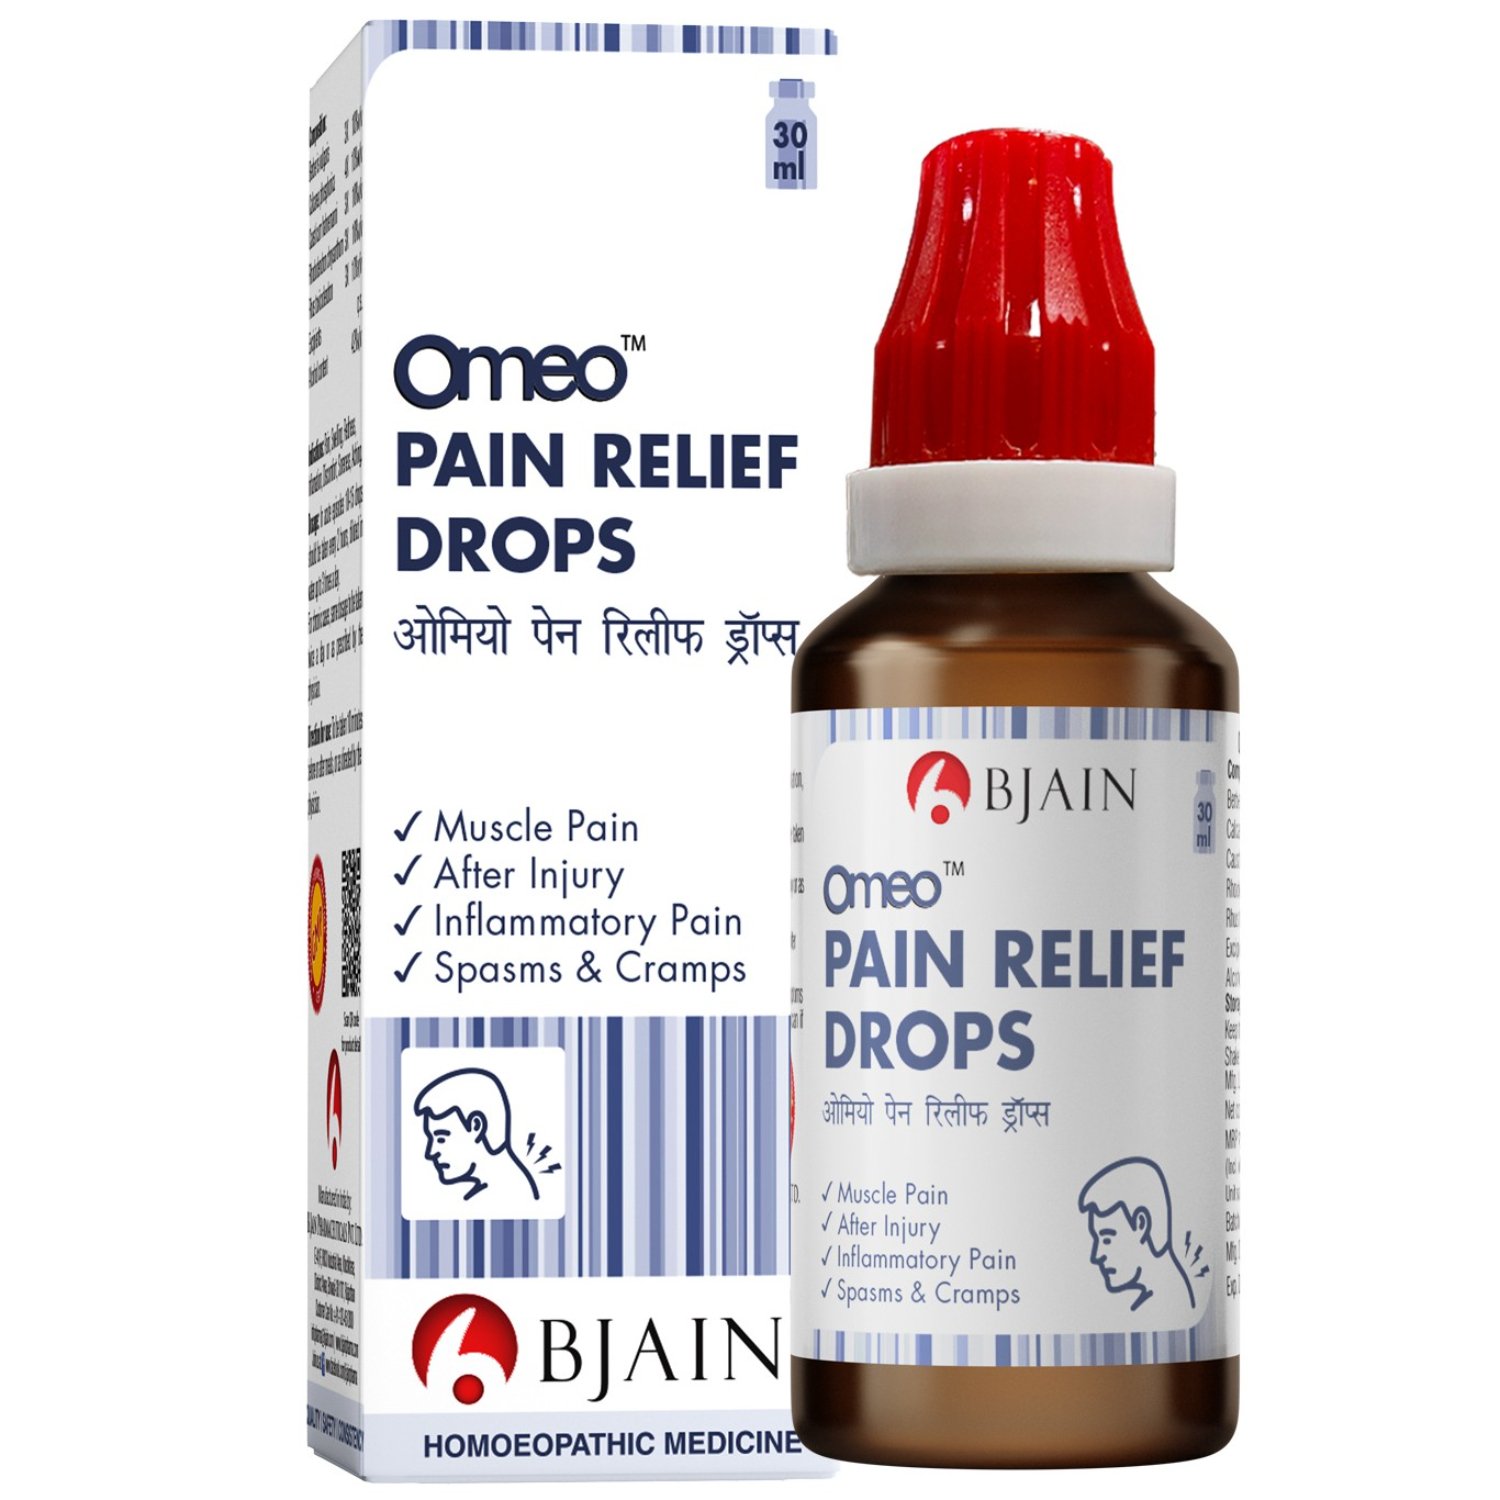 Omeo Pain Relief Drops